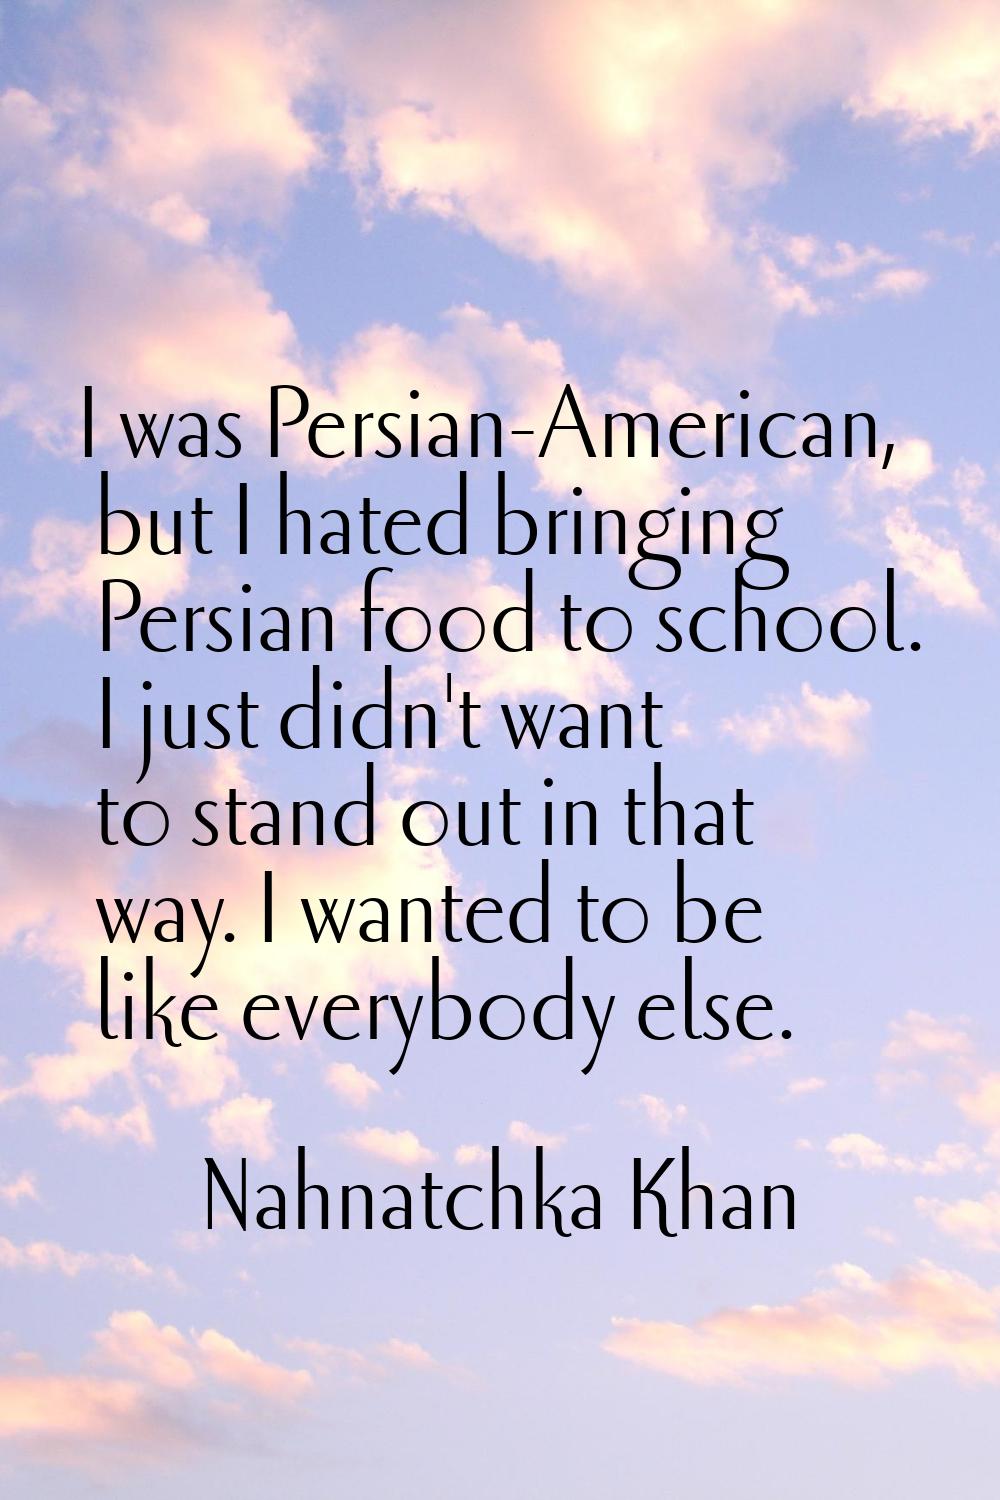 I was Persian-American, but I hated bringing Persian food to school. I just didn't want to stand ou